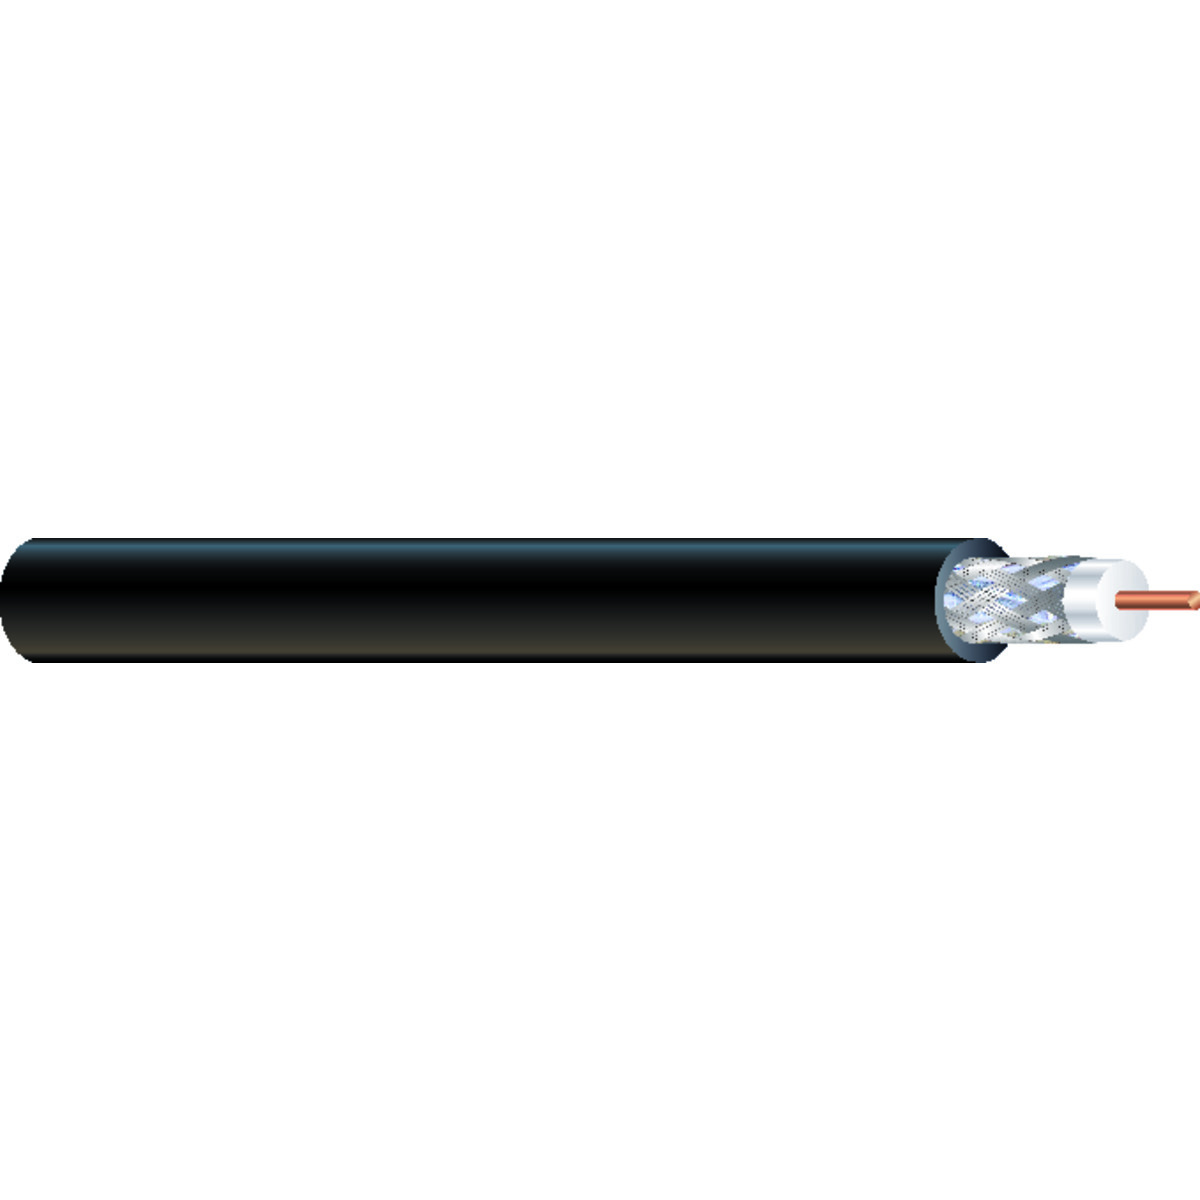 Cable coaxial, 2 conductores, 18 Awg